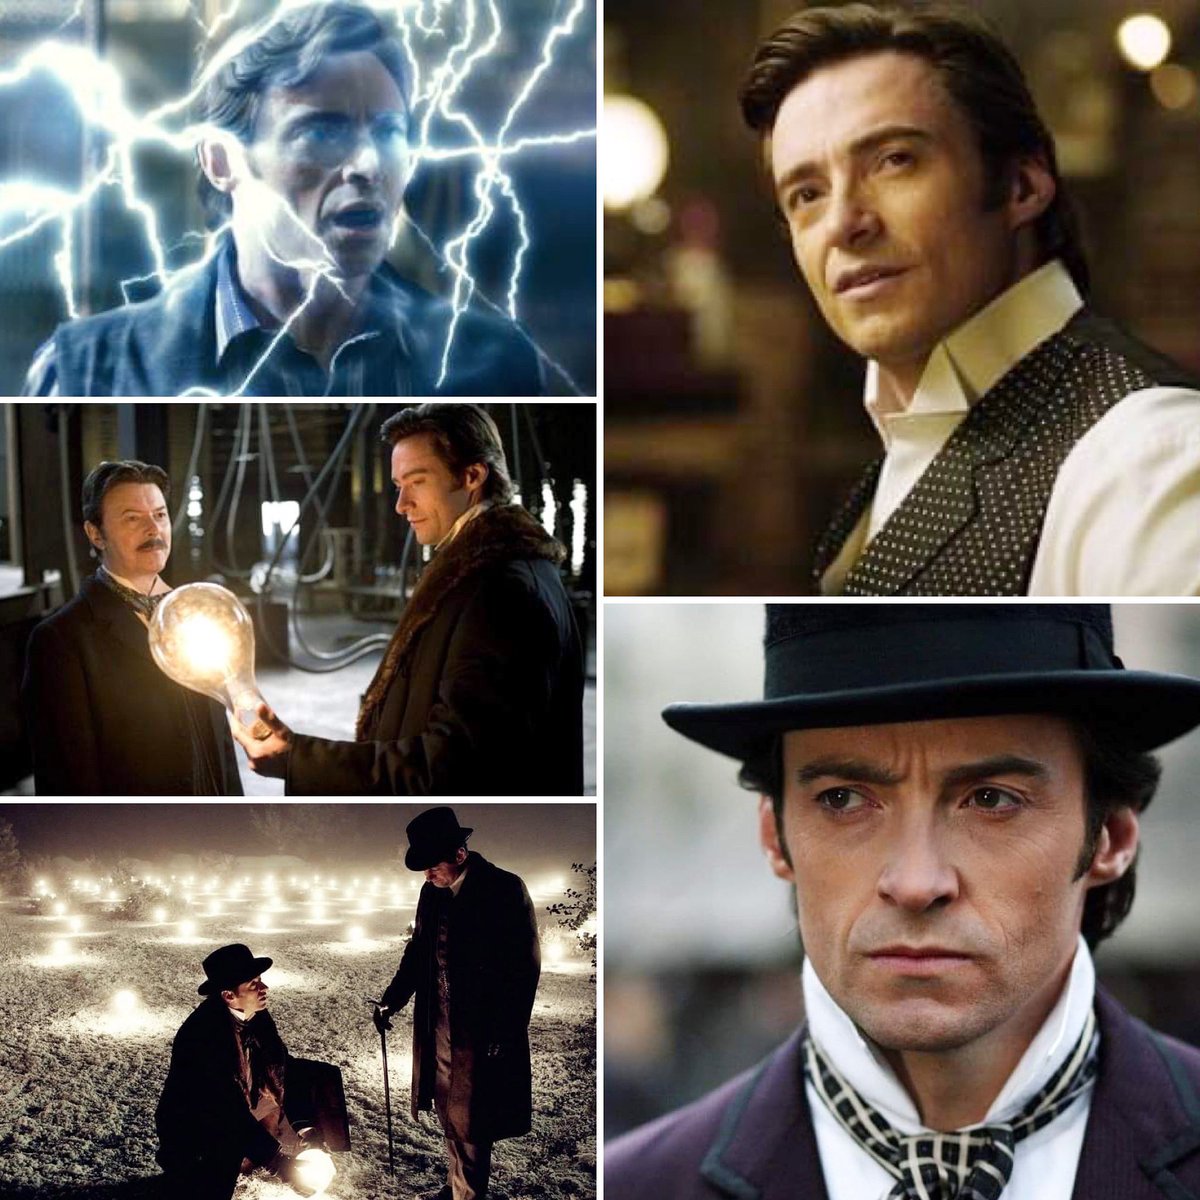 National Electricity Day gives us the perfect excuse to take a look back at Hugh as Robert Angier in The Prestige. ⚡️💡🎩

#hughjackman #theprestige #robertangier #thegreatdanton #nationalelectricityday 

📷: Touchstone Pictures/Warner Brothers